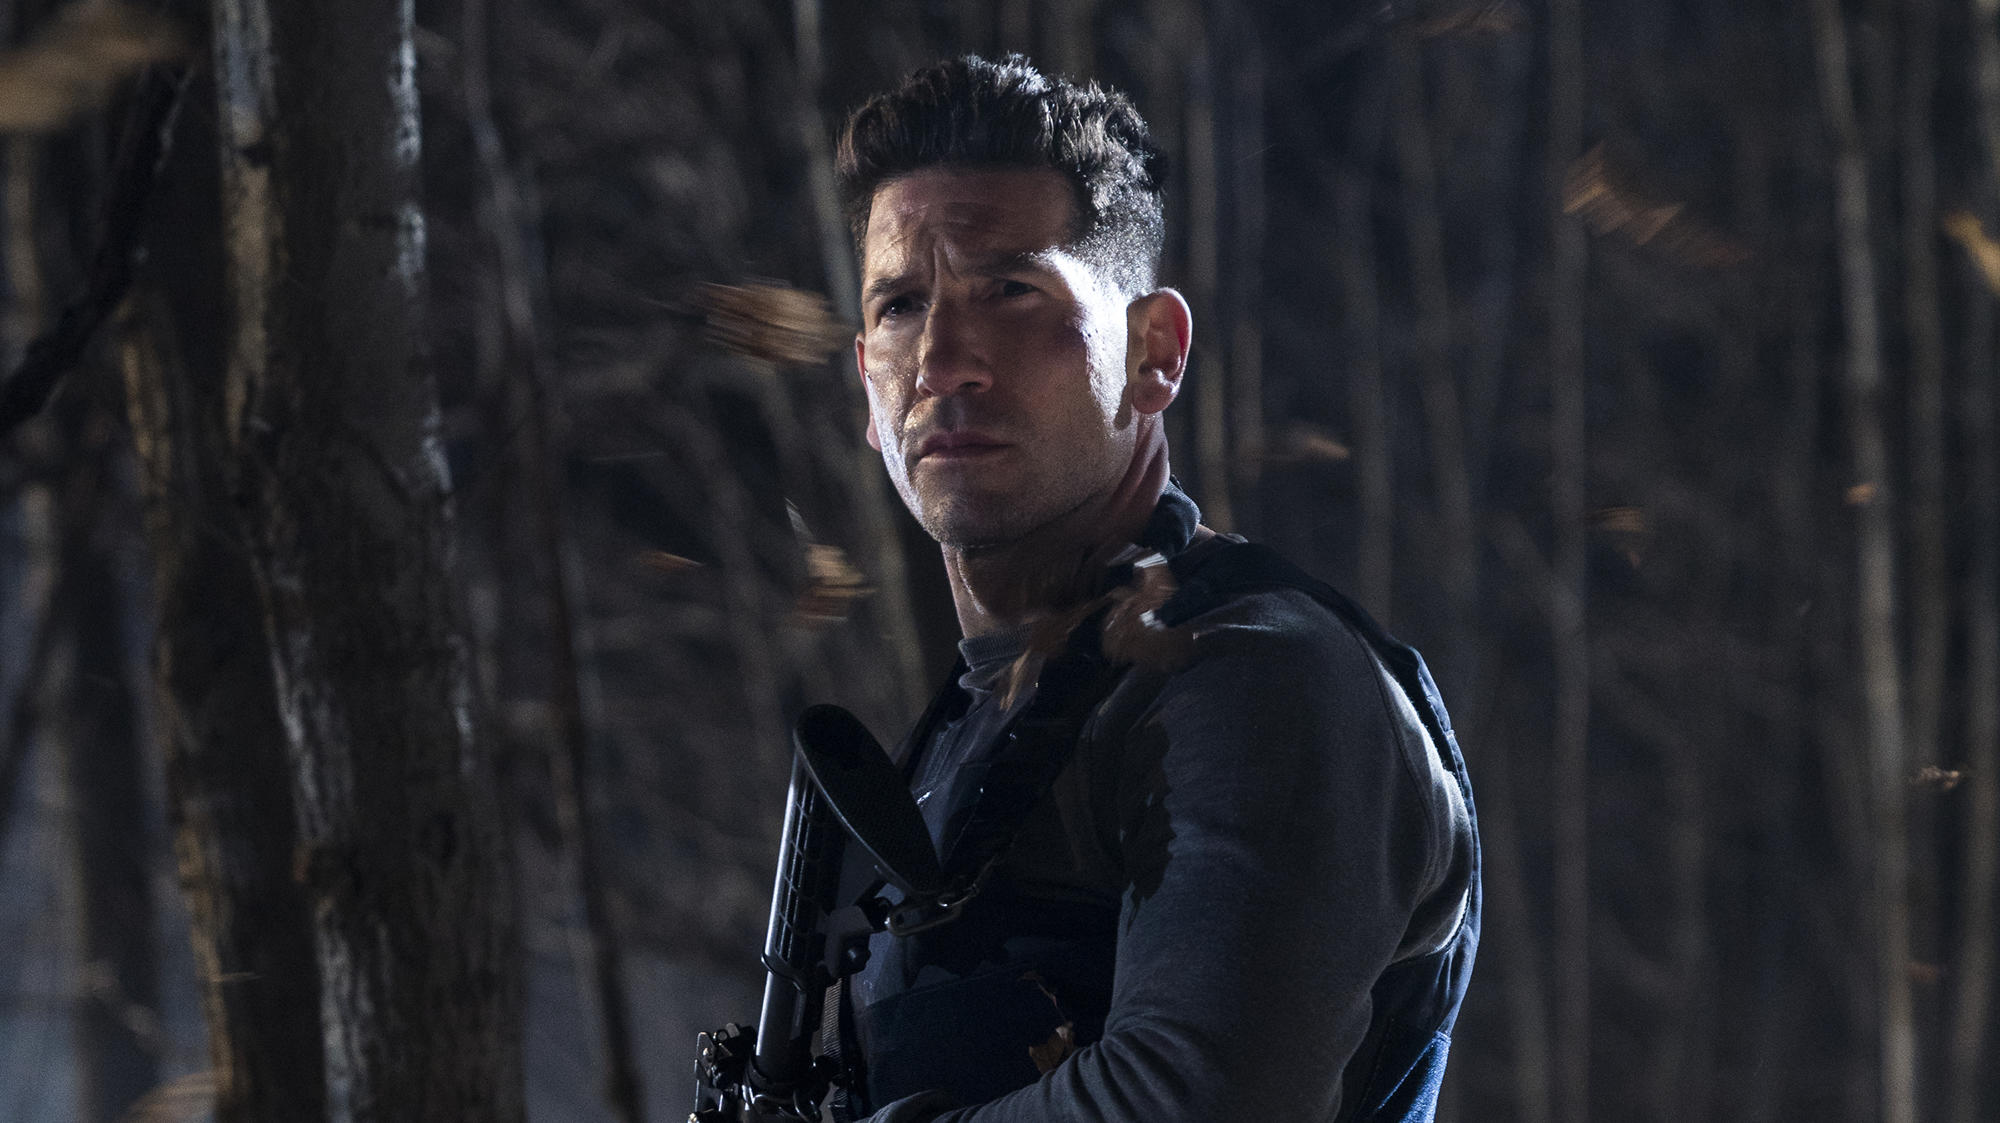 Marvel’s The Punisher Season 2 is on Netflix Today!